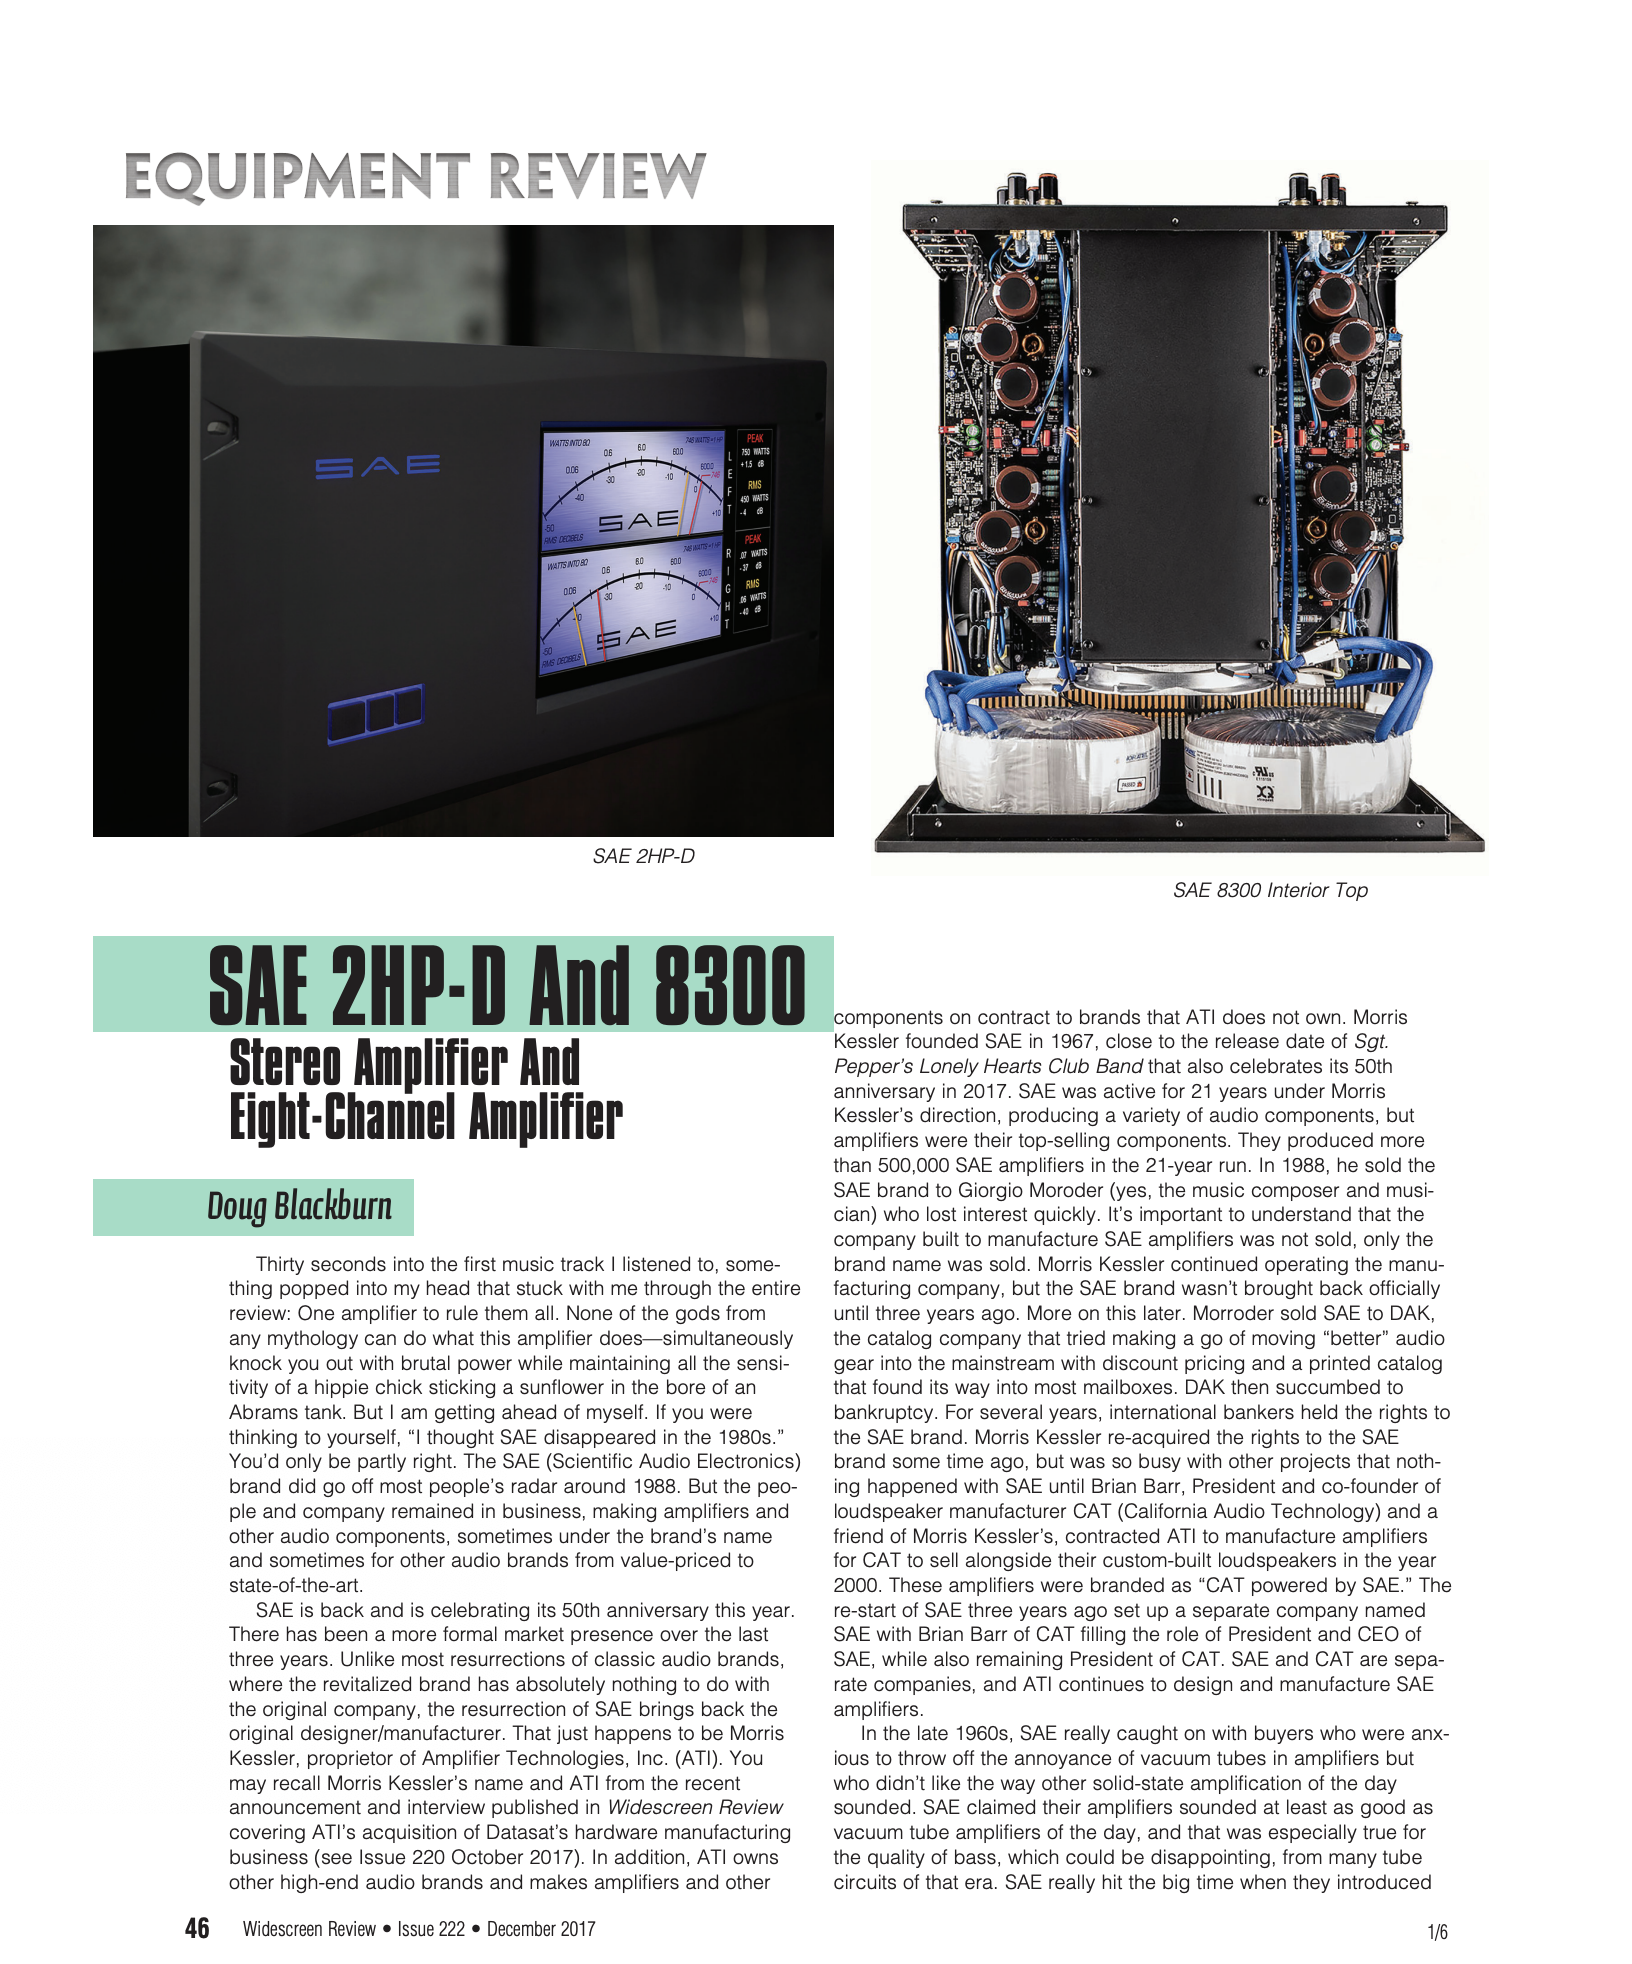 Widescreen Review: SAE 2HP-D and 8300 Amplifiers